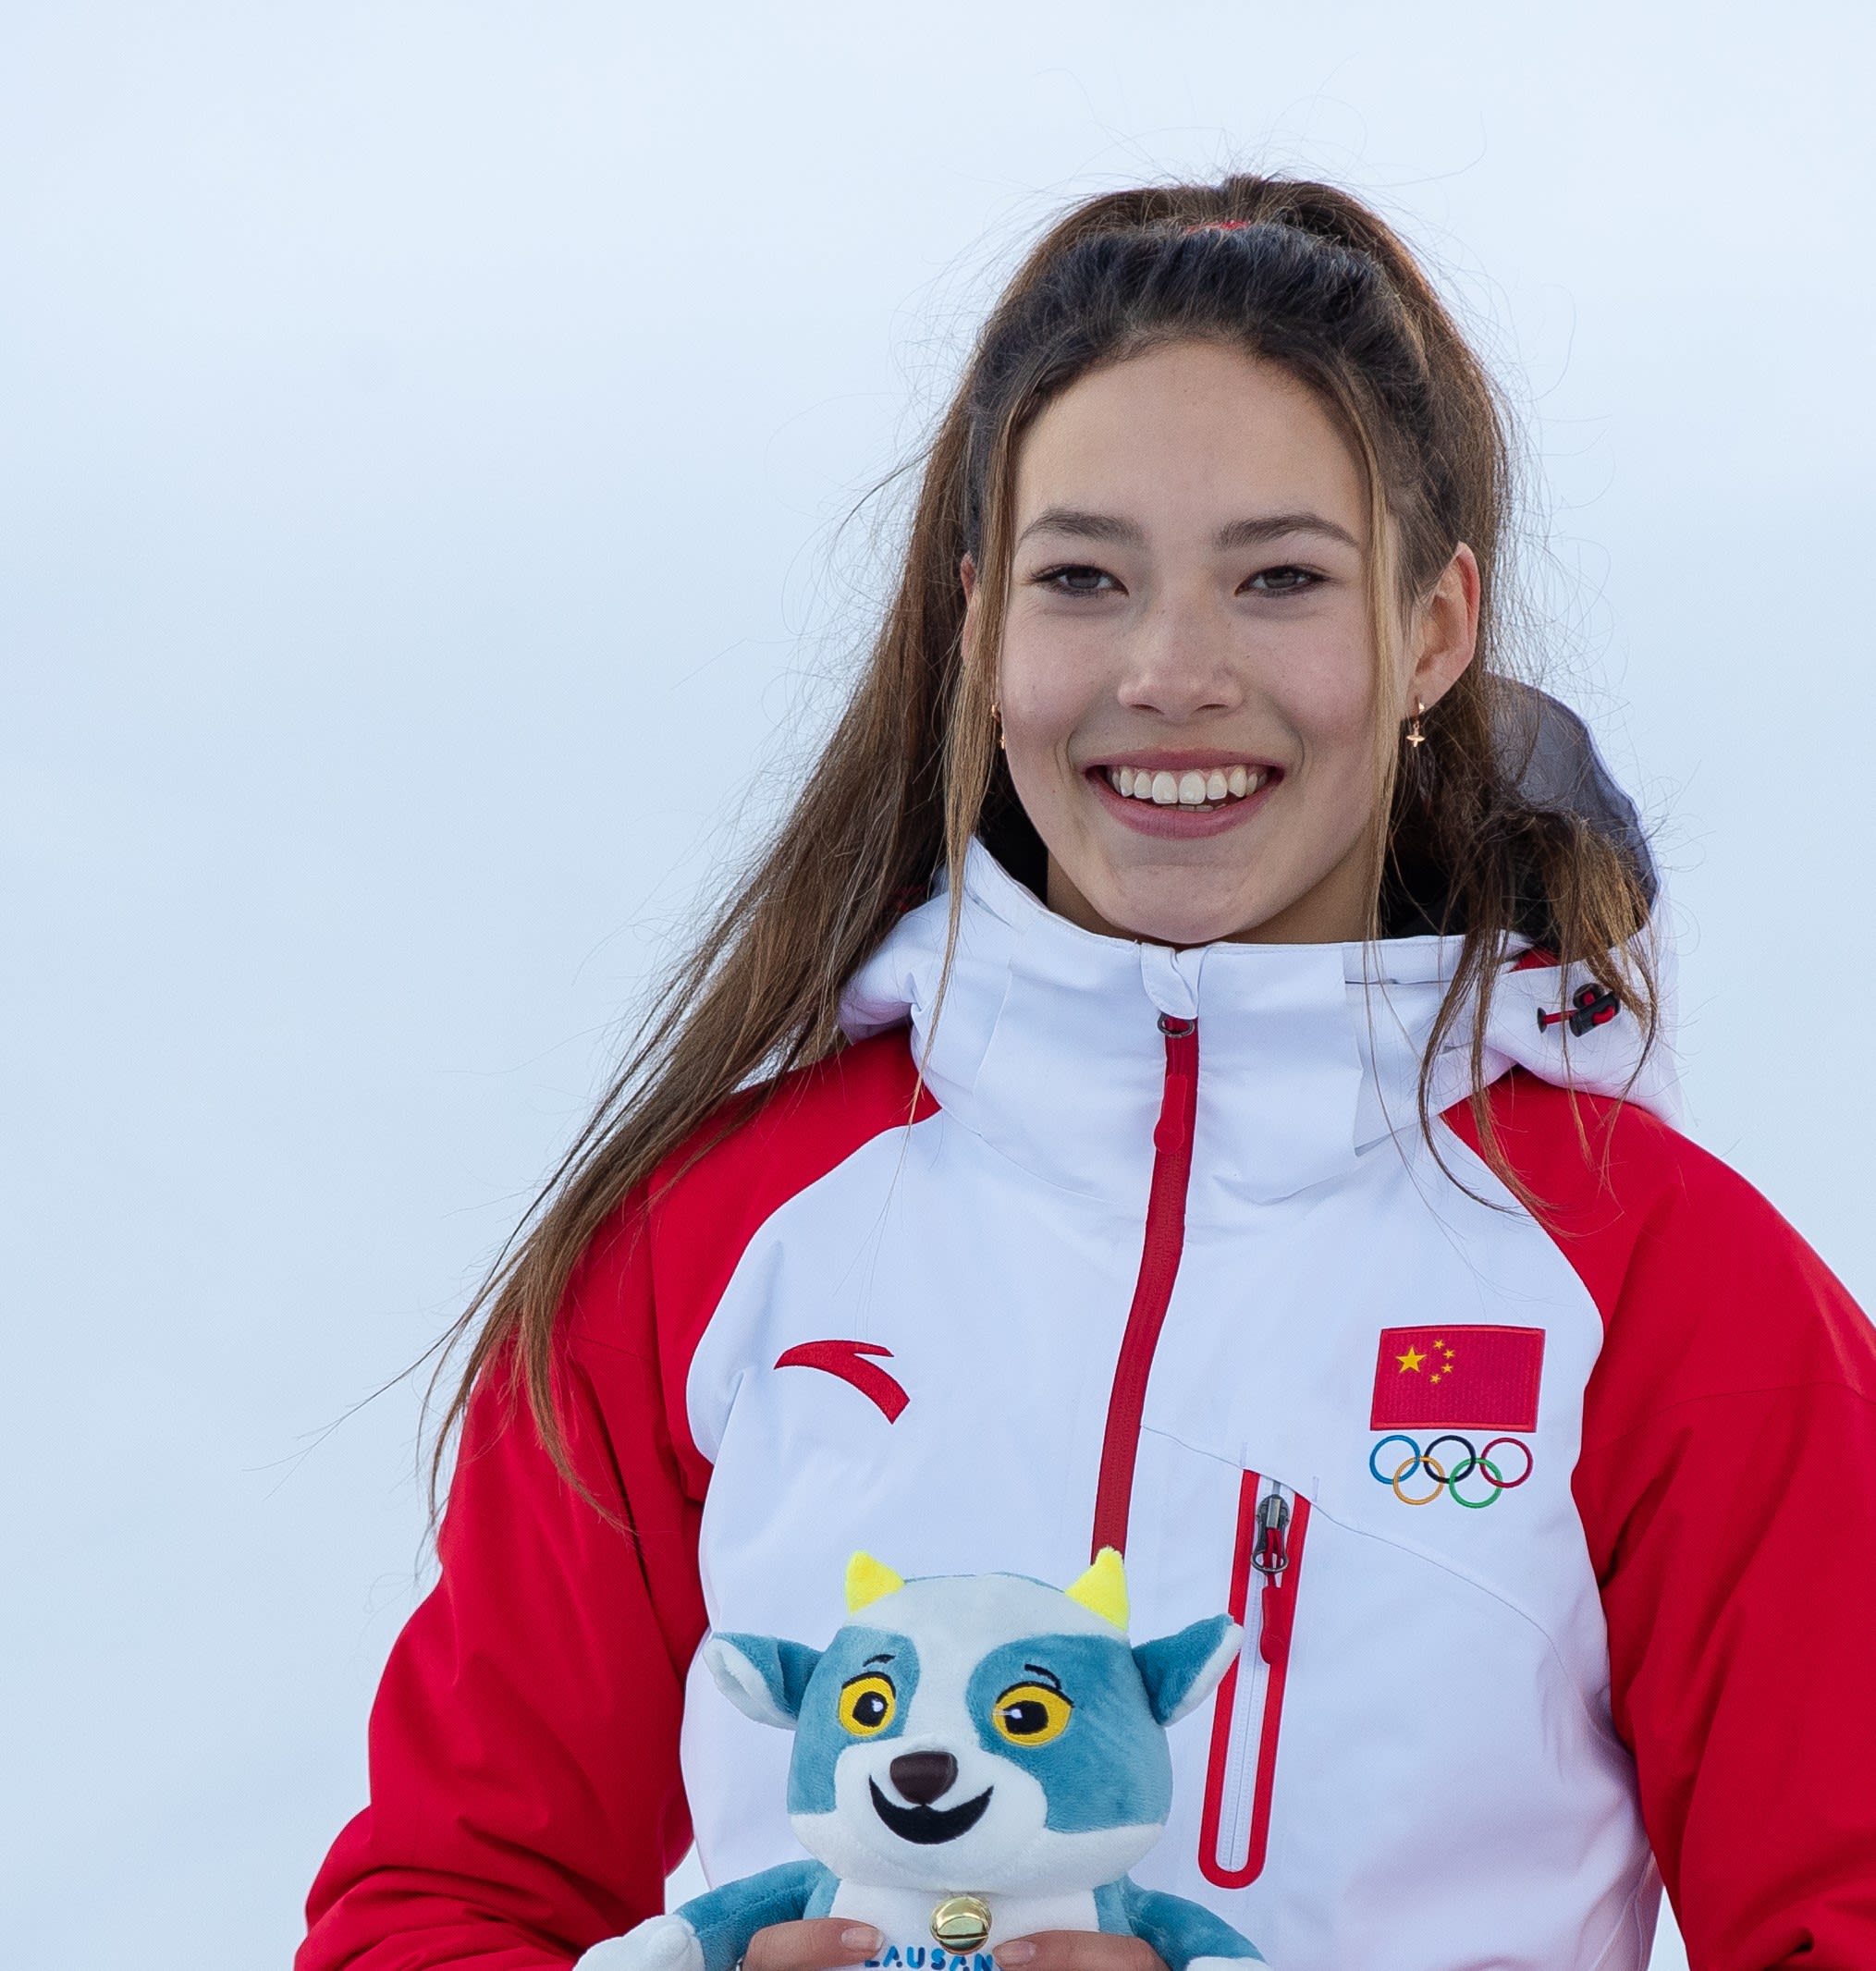 Freestyle skier Eileen Gu Ailing attends IWC event on August 1